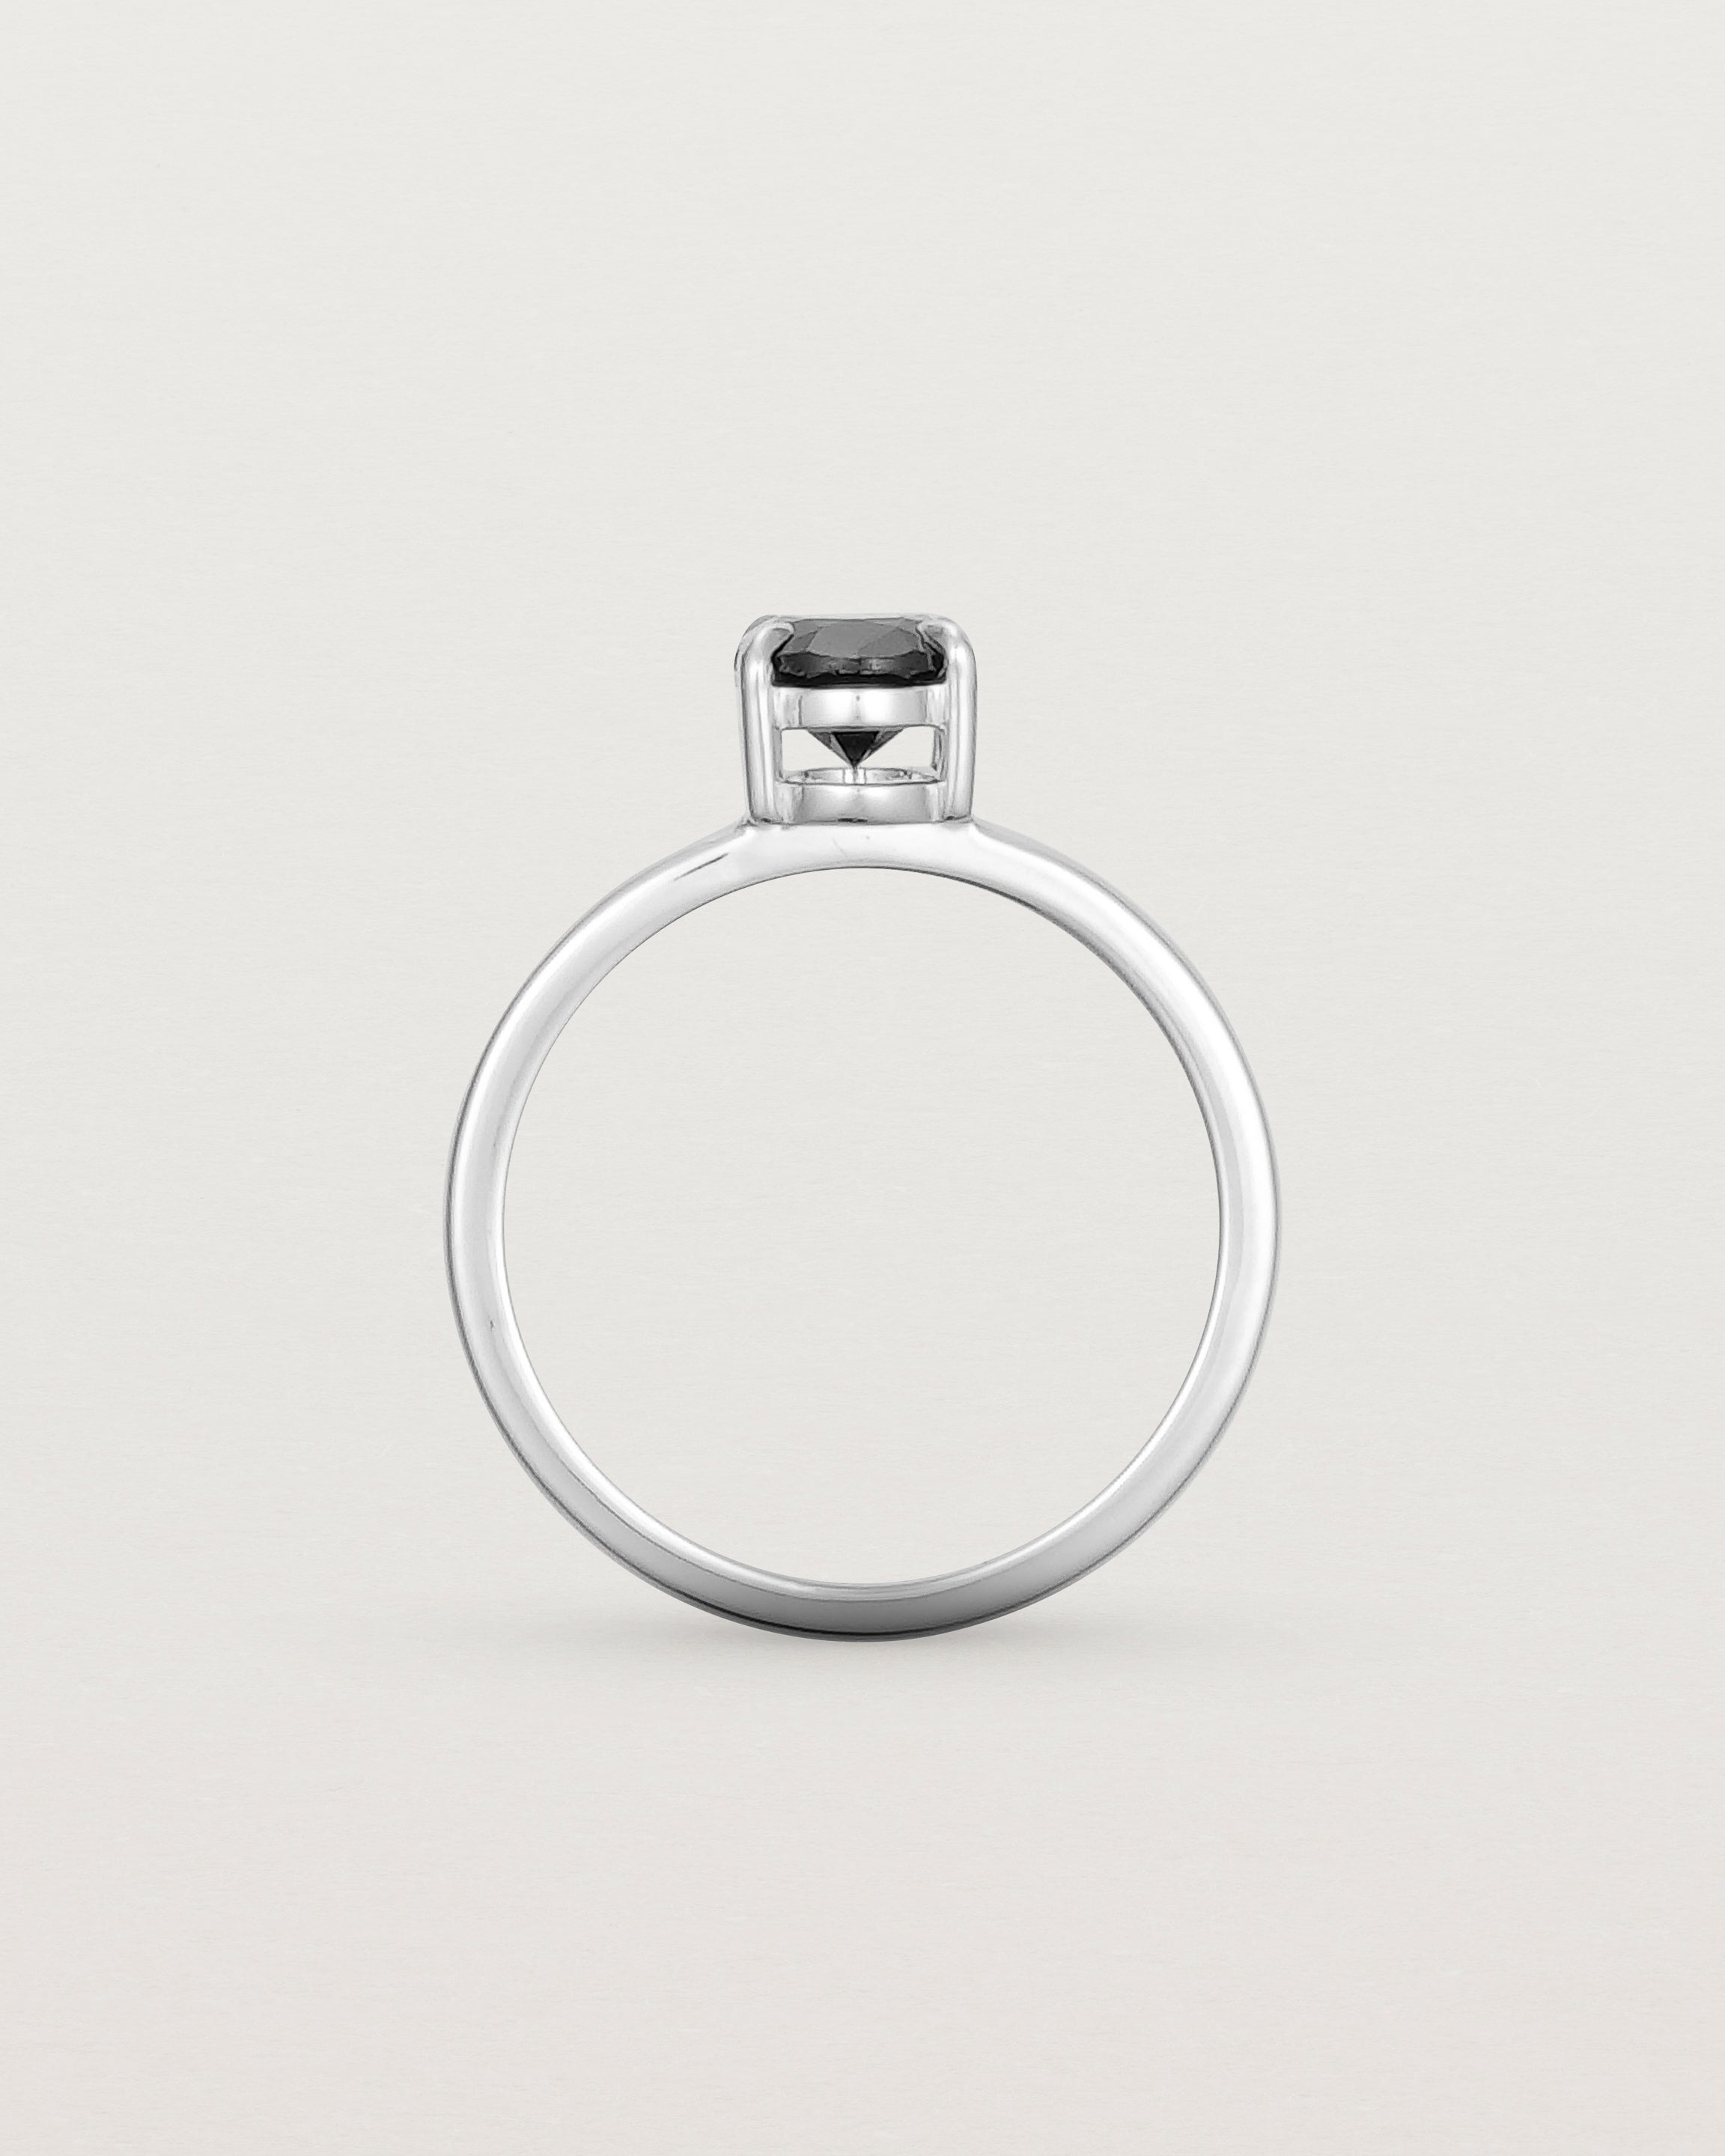 Standing view of the Una Oval Solitaire | Black Spinel | White Gold.